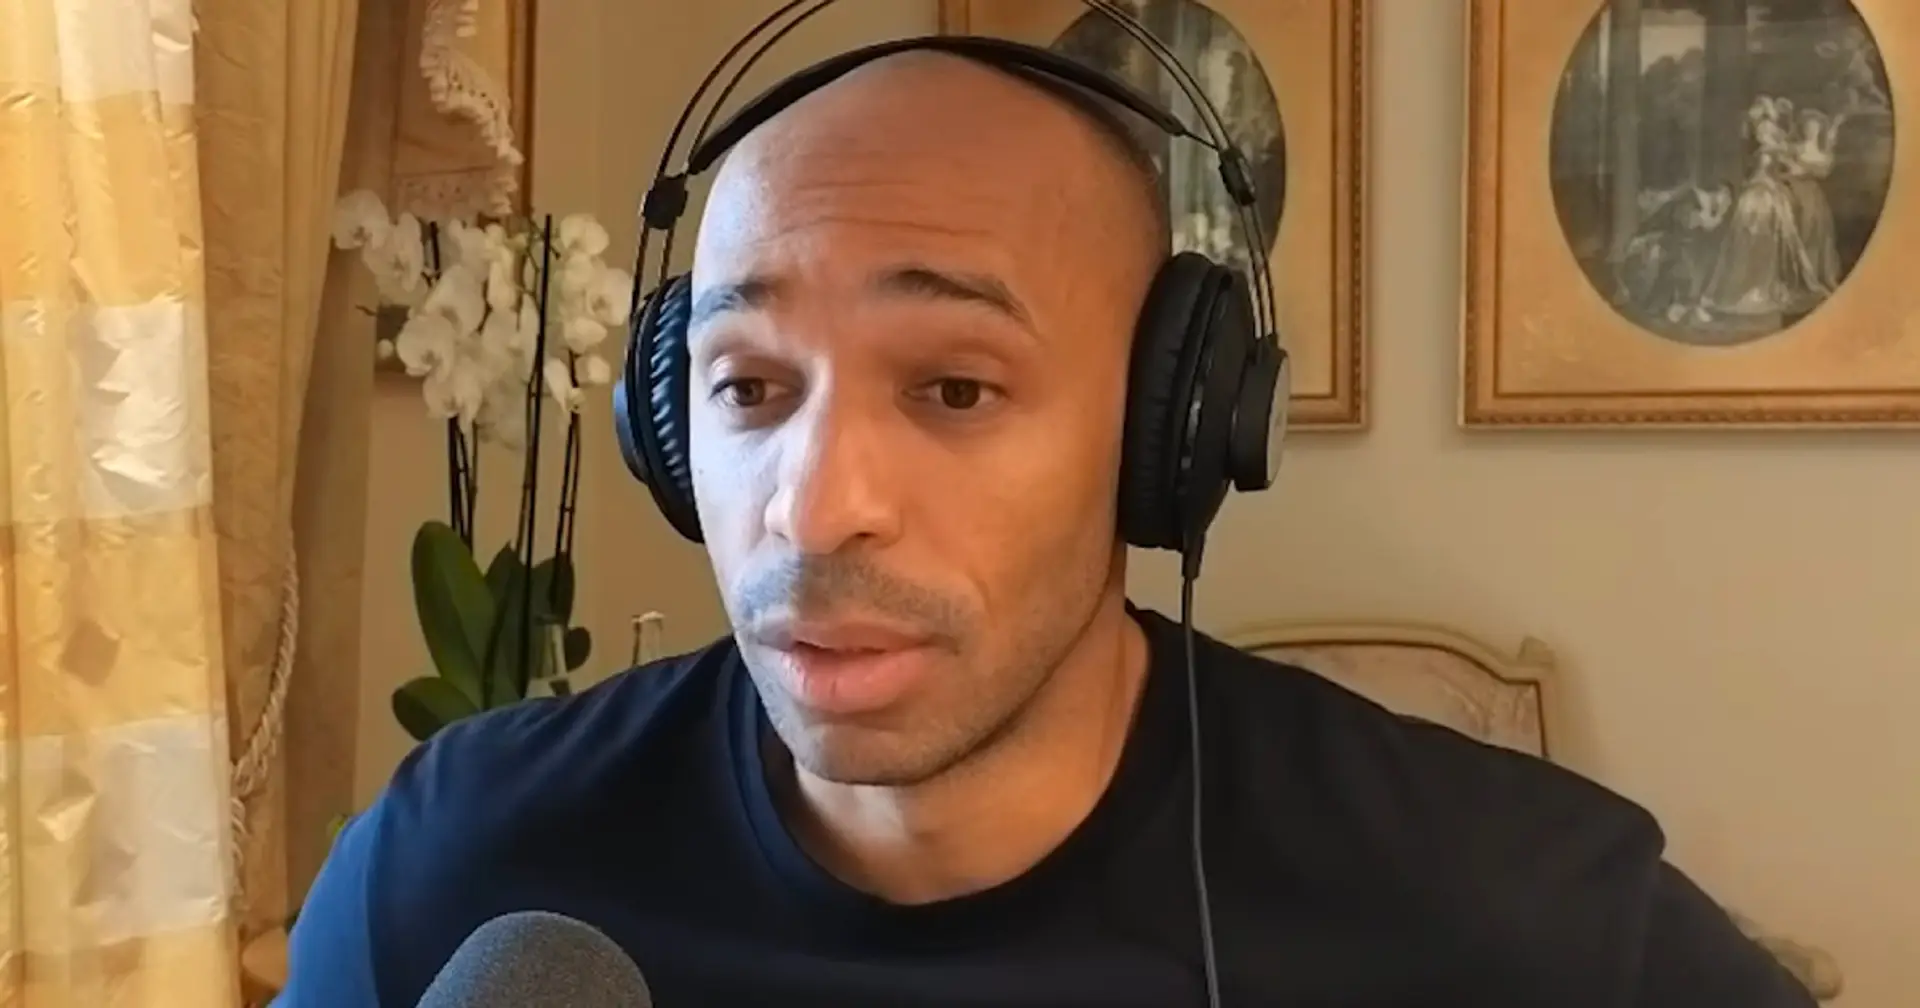 'He can take the ball from his house, arrive at Stamford Bridge and score': Thierry Henry names Chelsea player he 'admired'